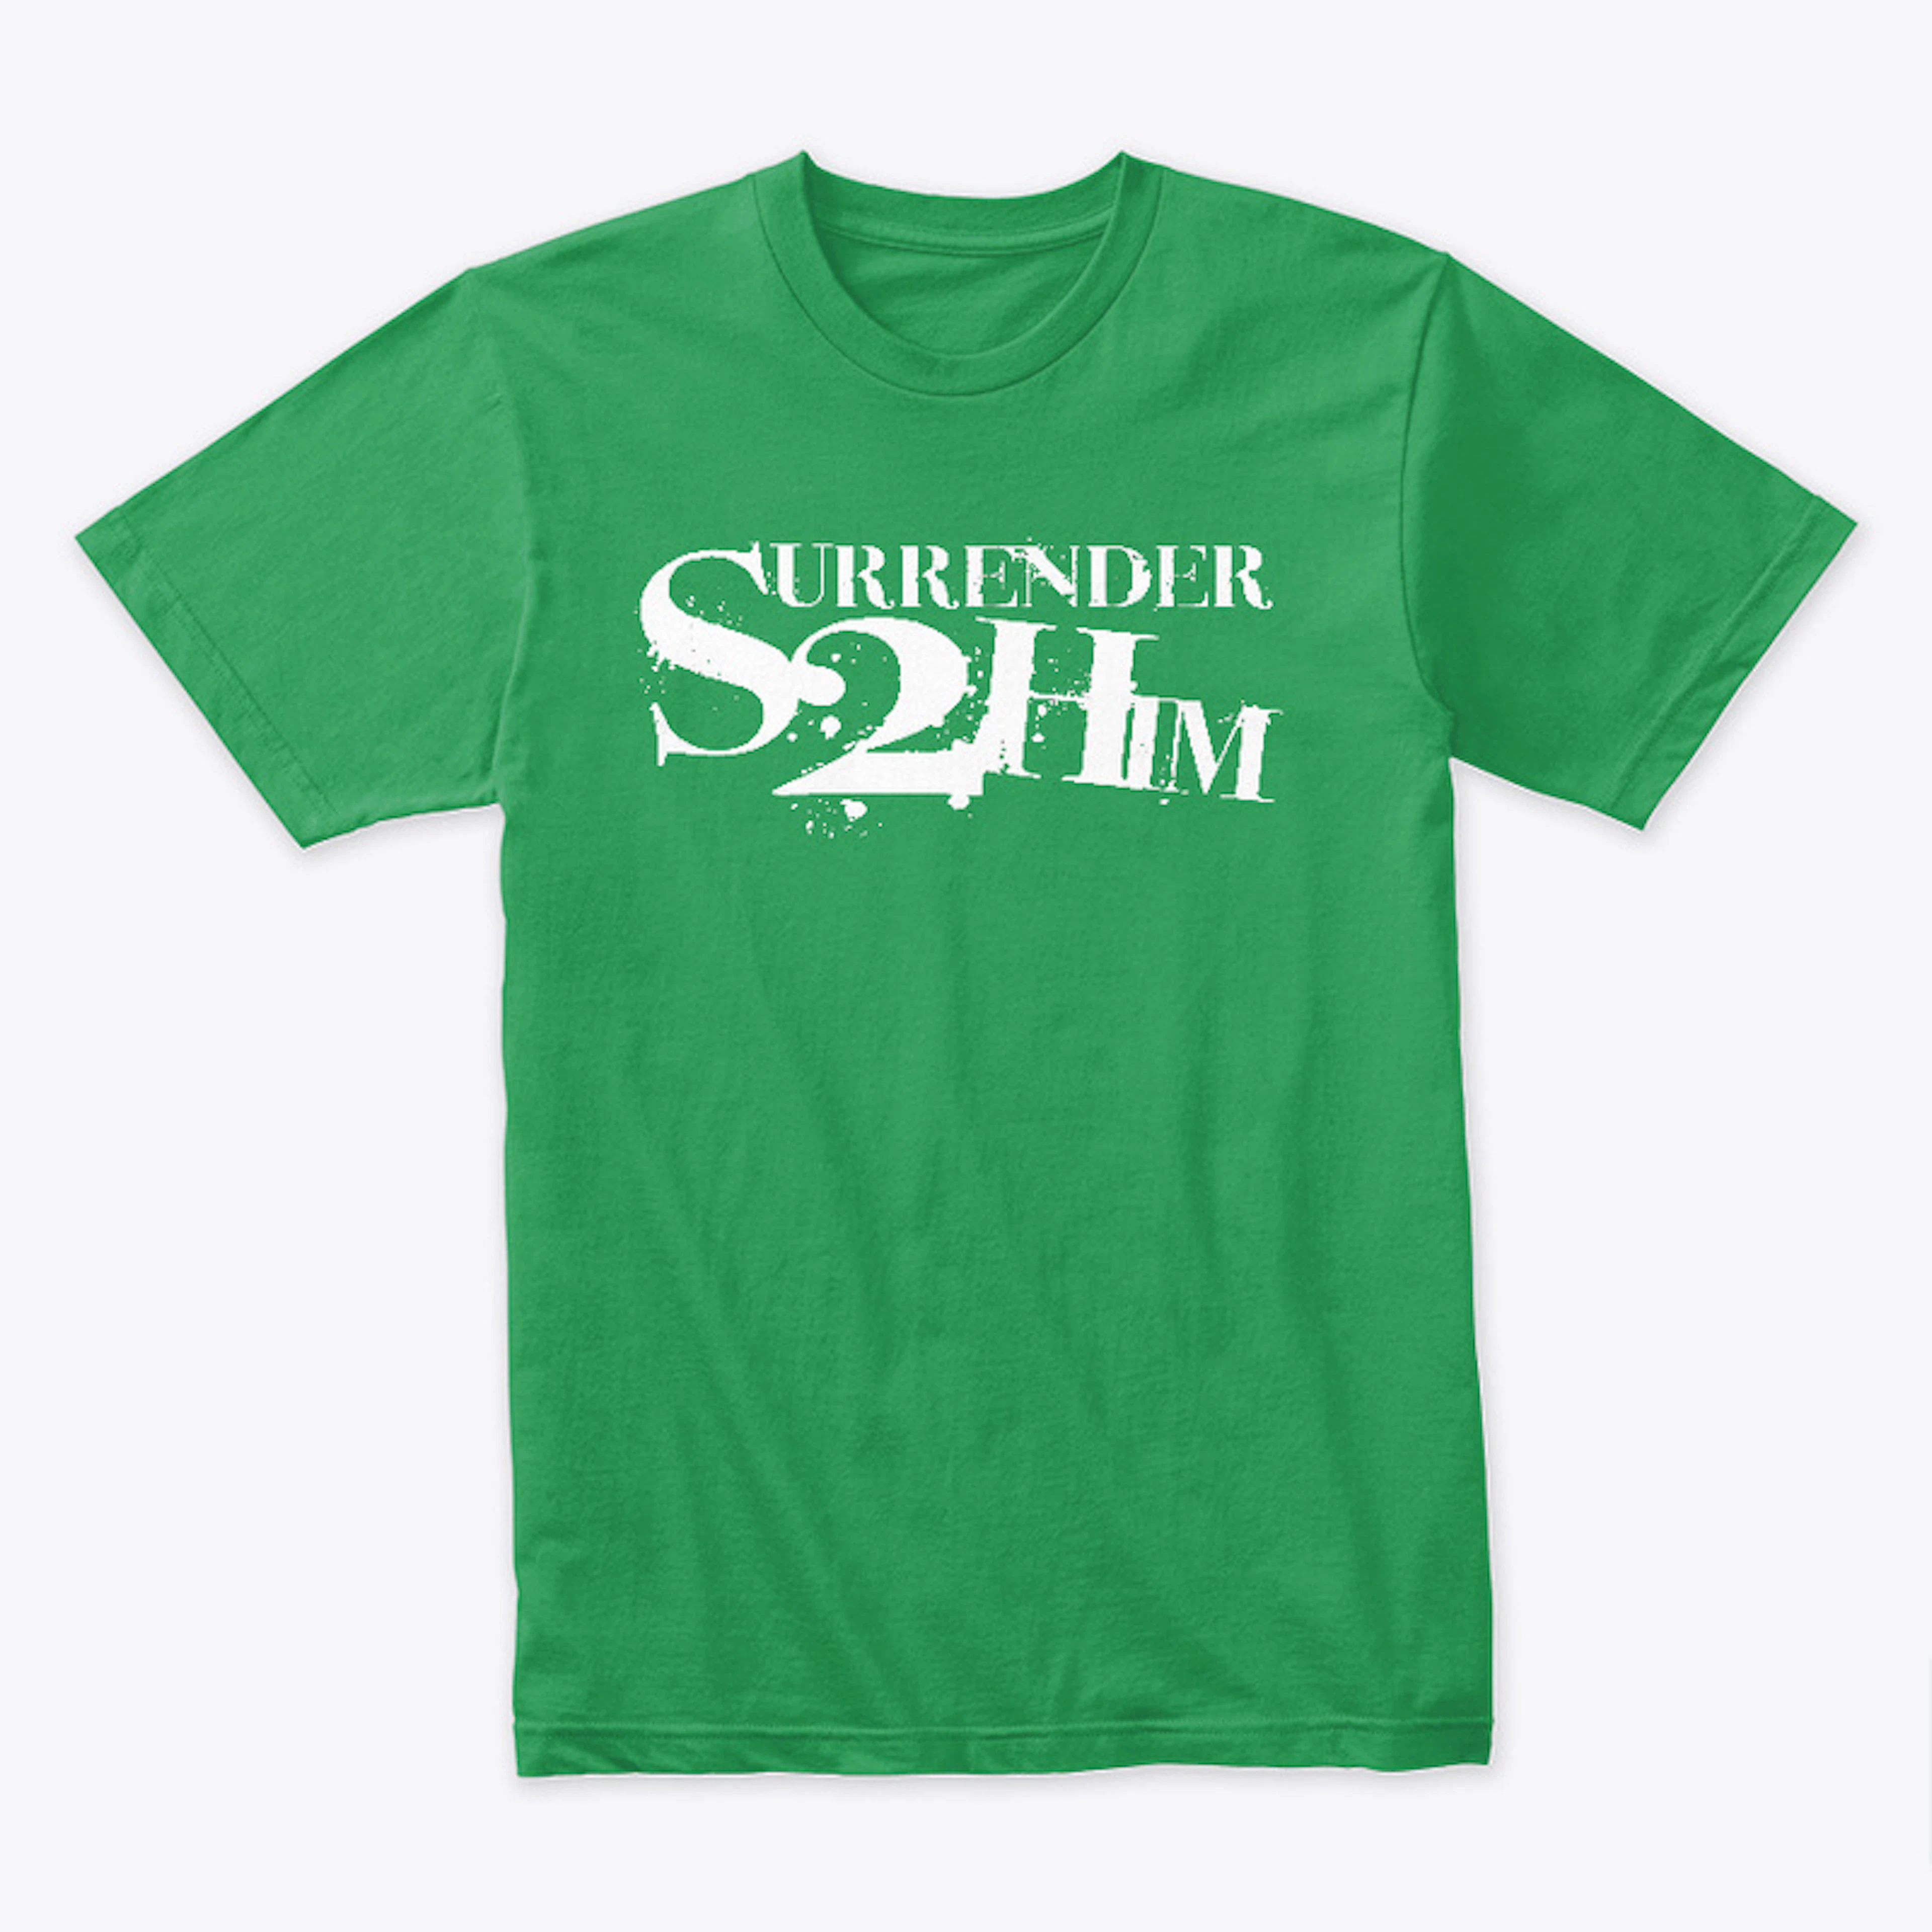 S2H Tee White Logo - Various Colors